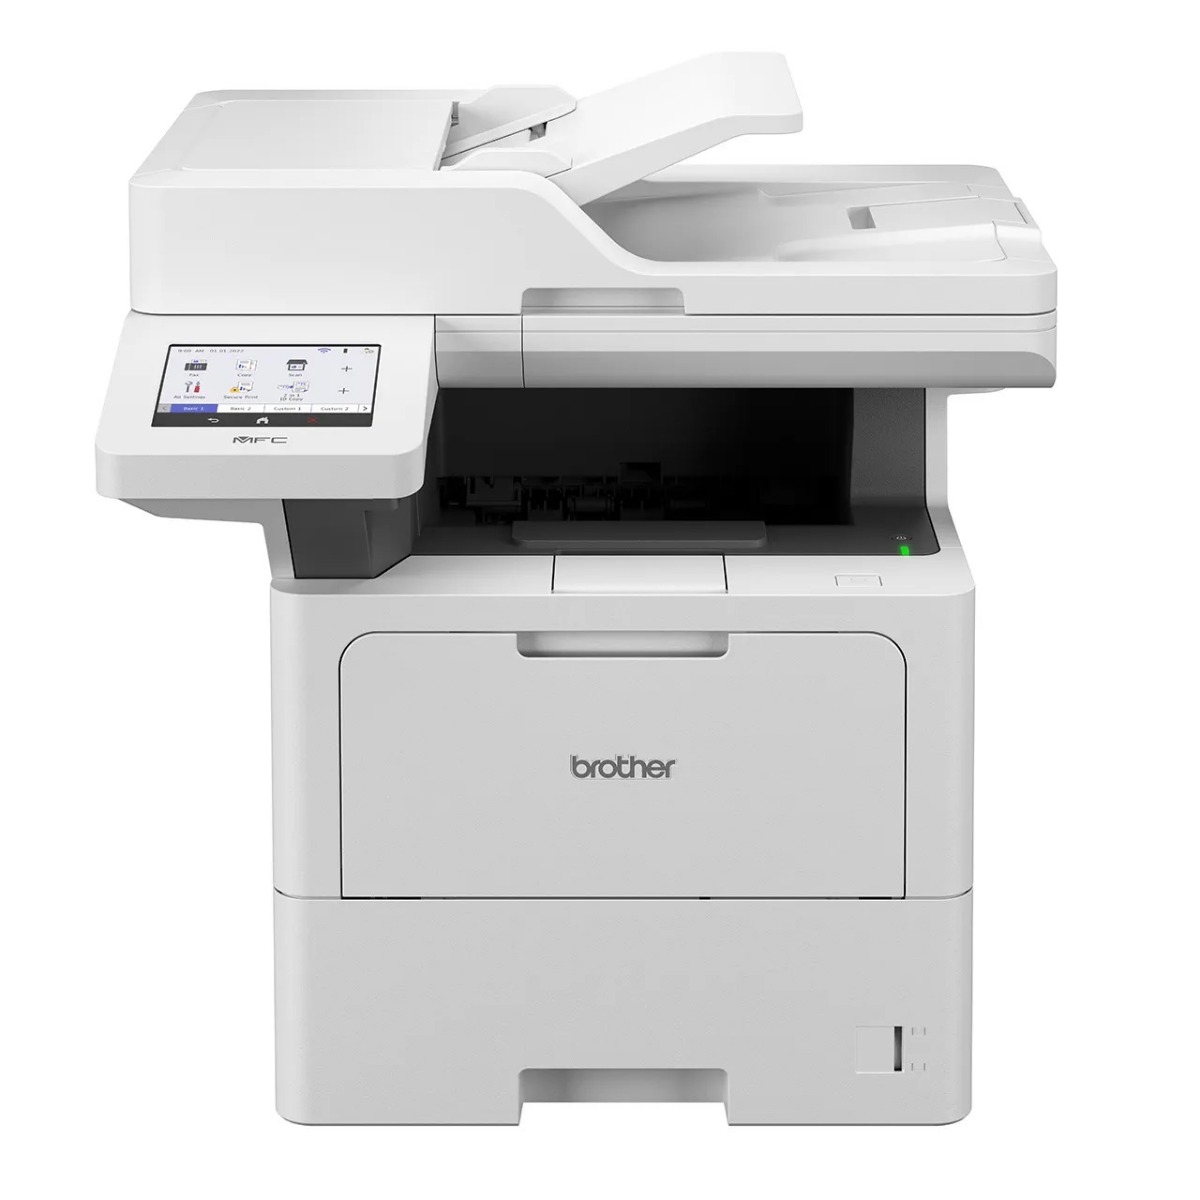 Brother Mono All-in-One Laser Wireless Printer, White - MFC-L6710DW